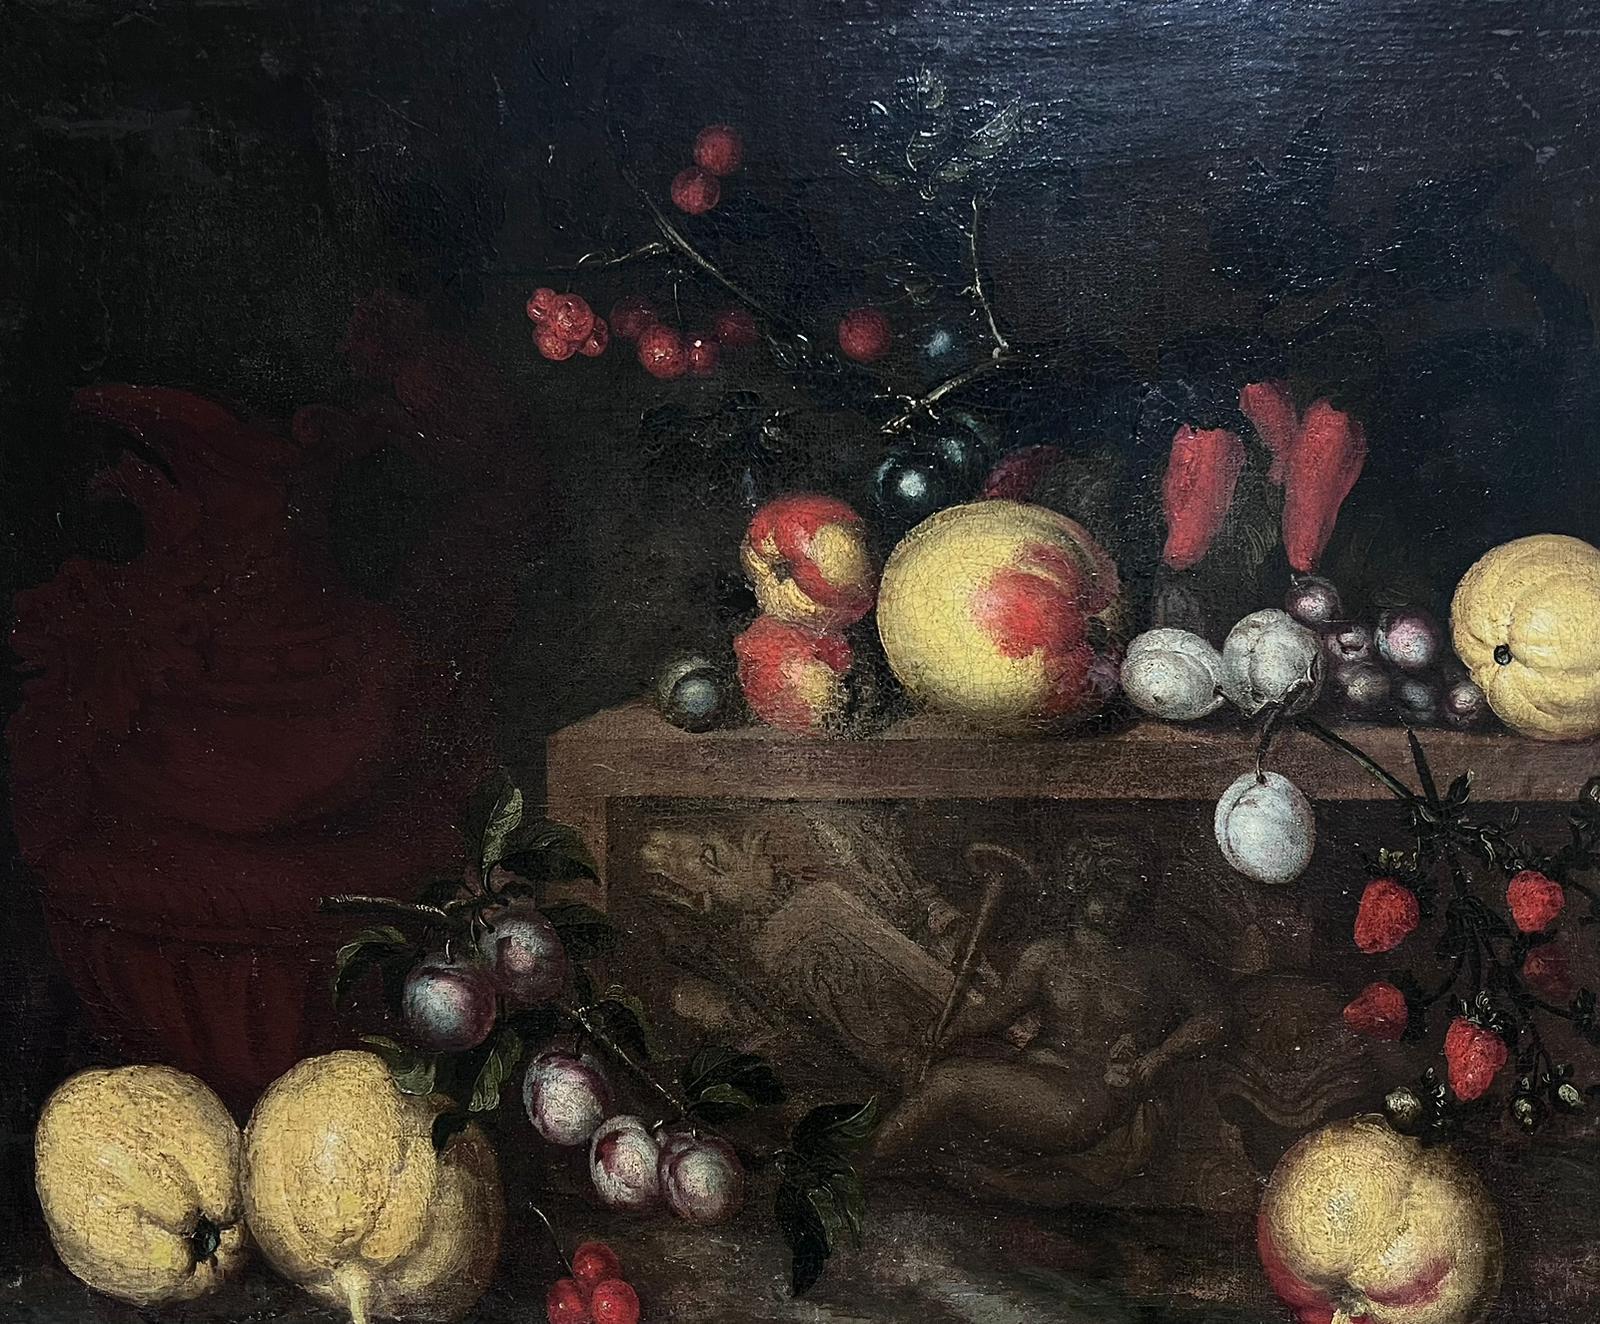 Ornate Classical Fruit Still Life 
Italian School, 17th century
oil on canvas, unframed
canvas: 22 x 27 inches
provenance: private collection, UK
condition: very good and sound condition